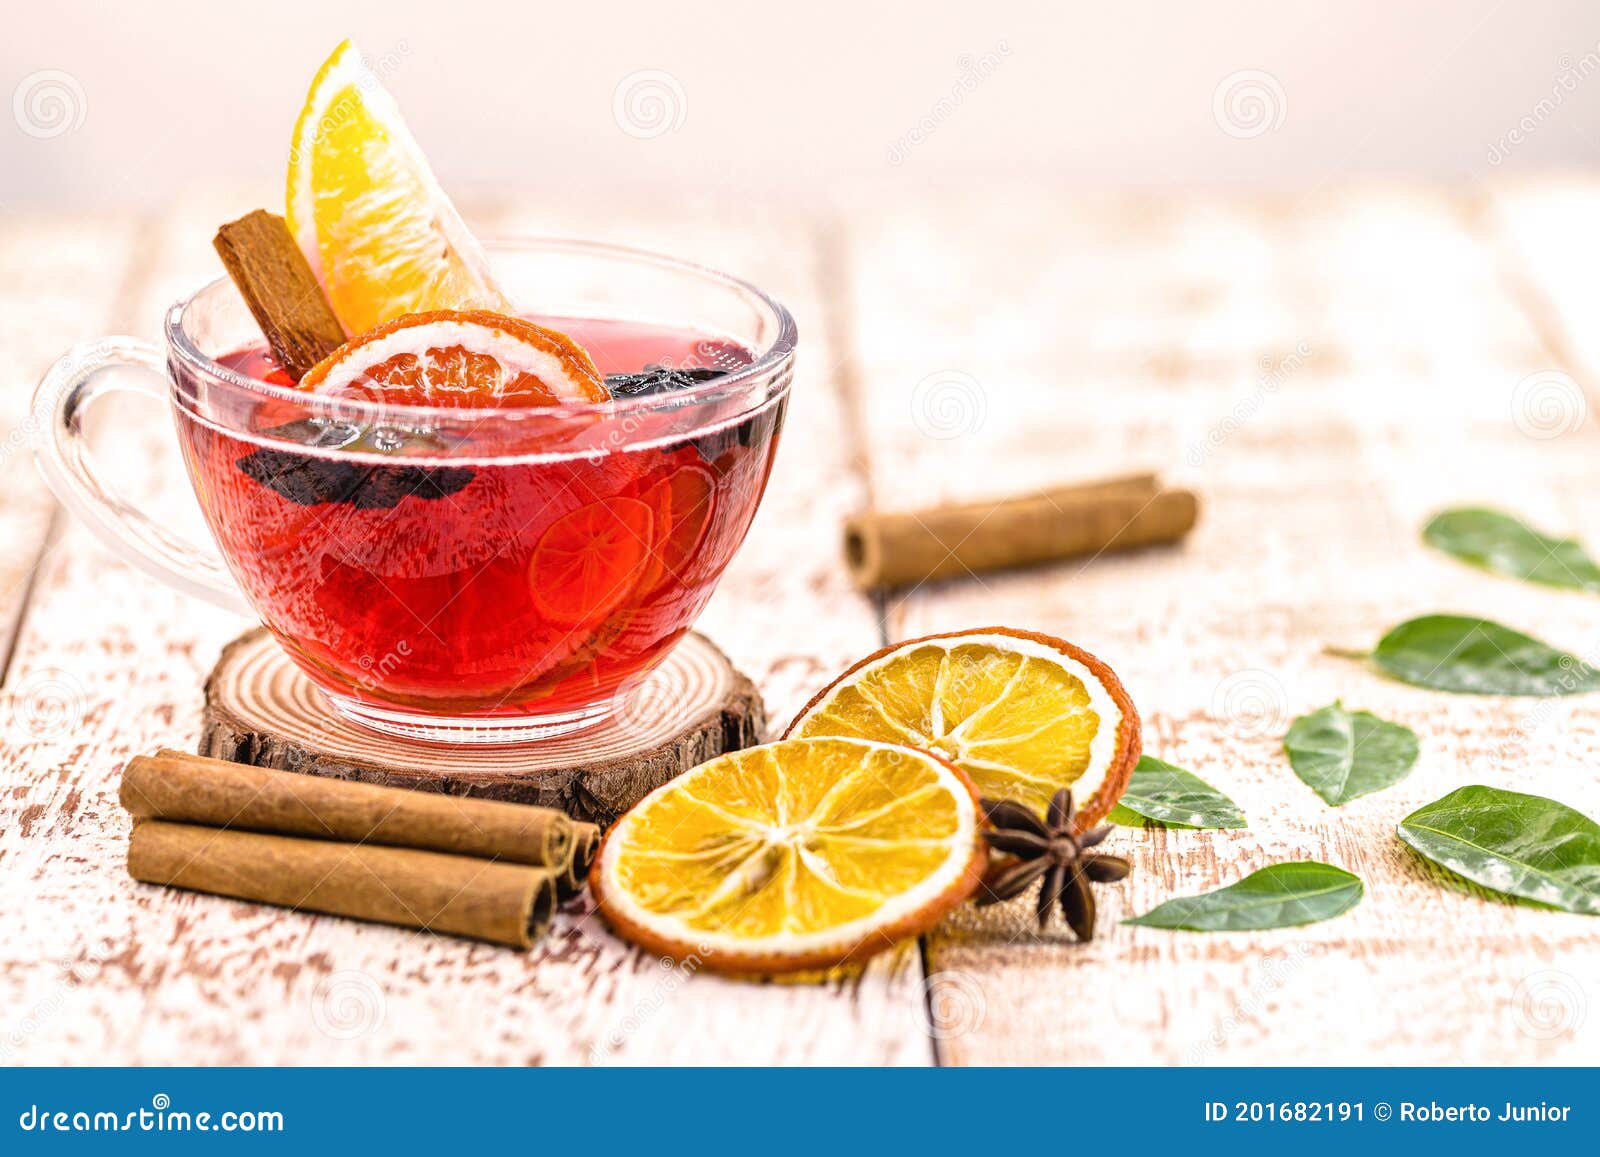 Spanish Sangria, Hot Winter Drink Served at Christmas and New Year ...